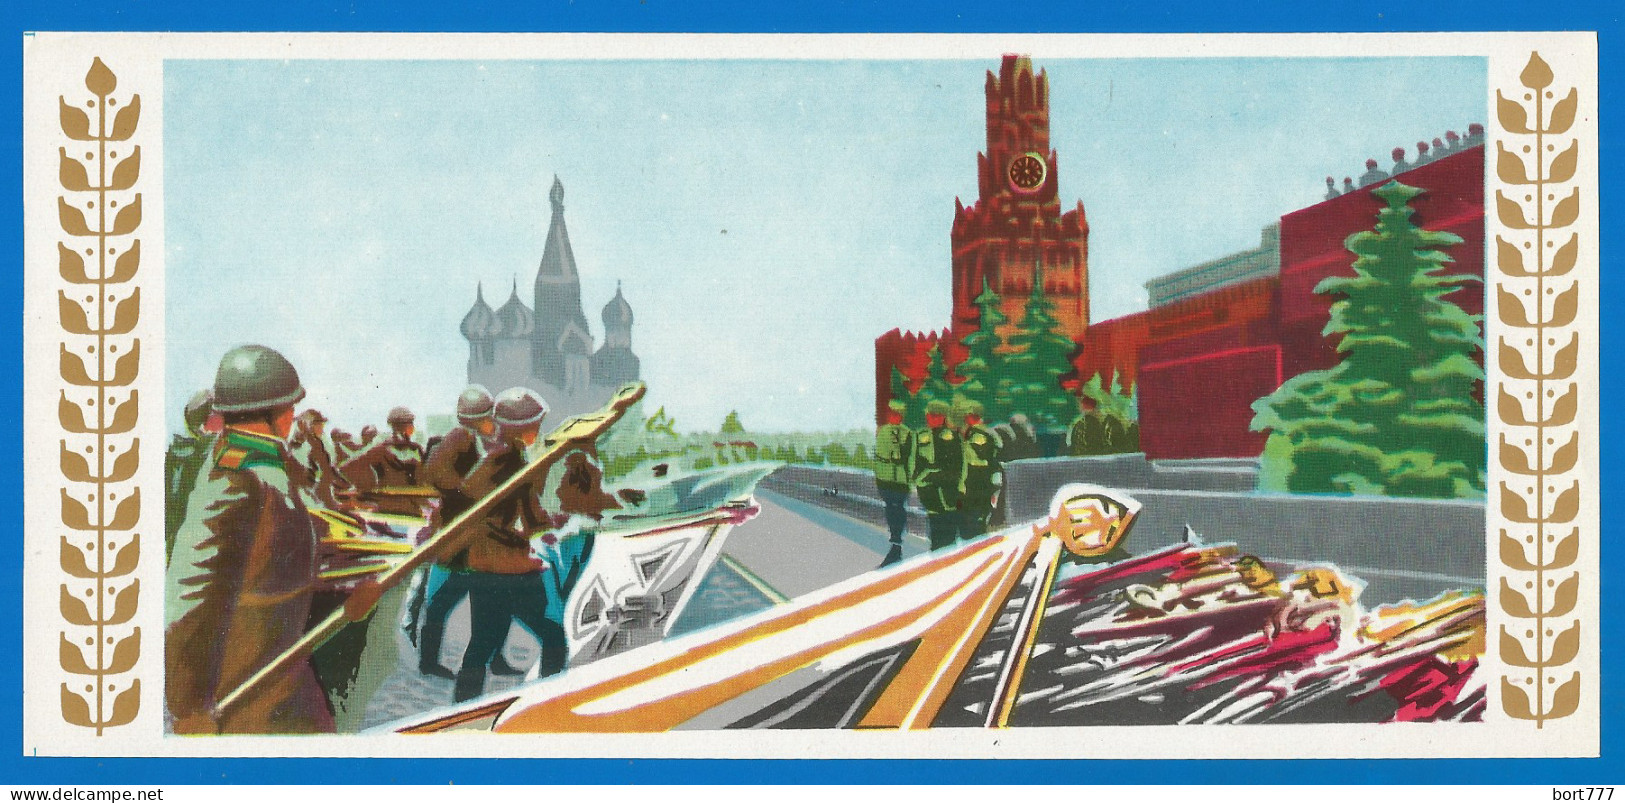 RUSSIA 1975 GROSS Matchbox Label -30 Years Of The Victory (catalog #290) - Zündholzschachteletiketten